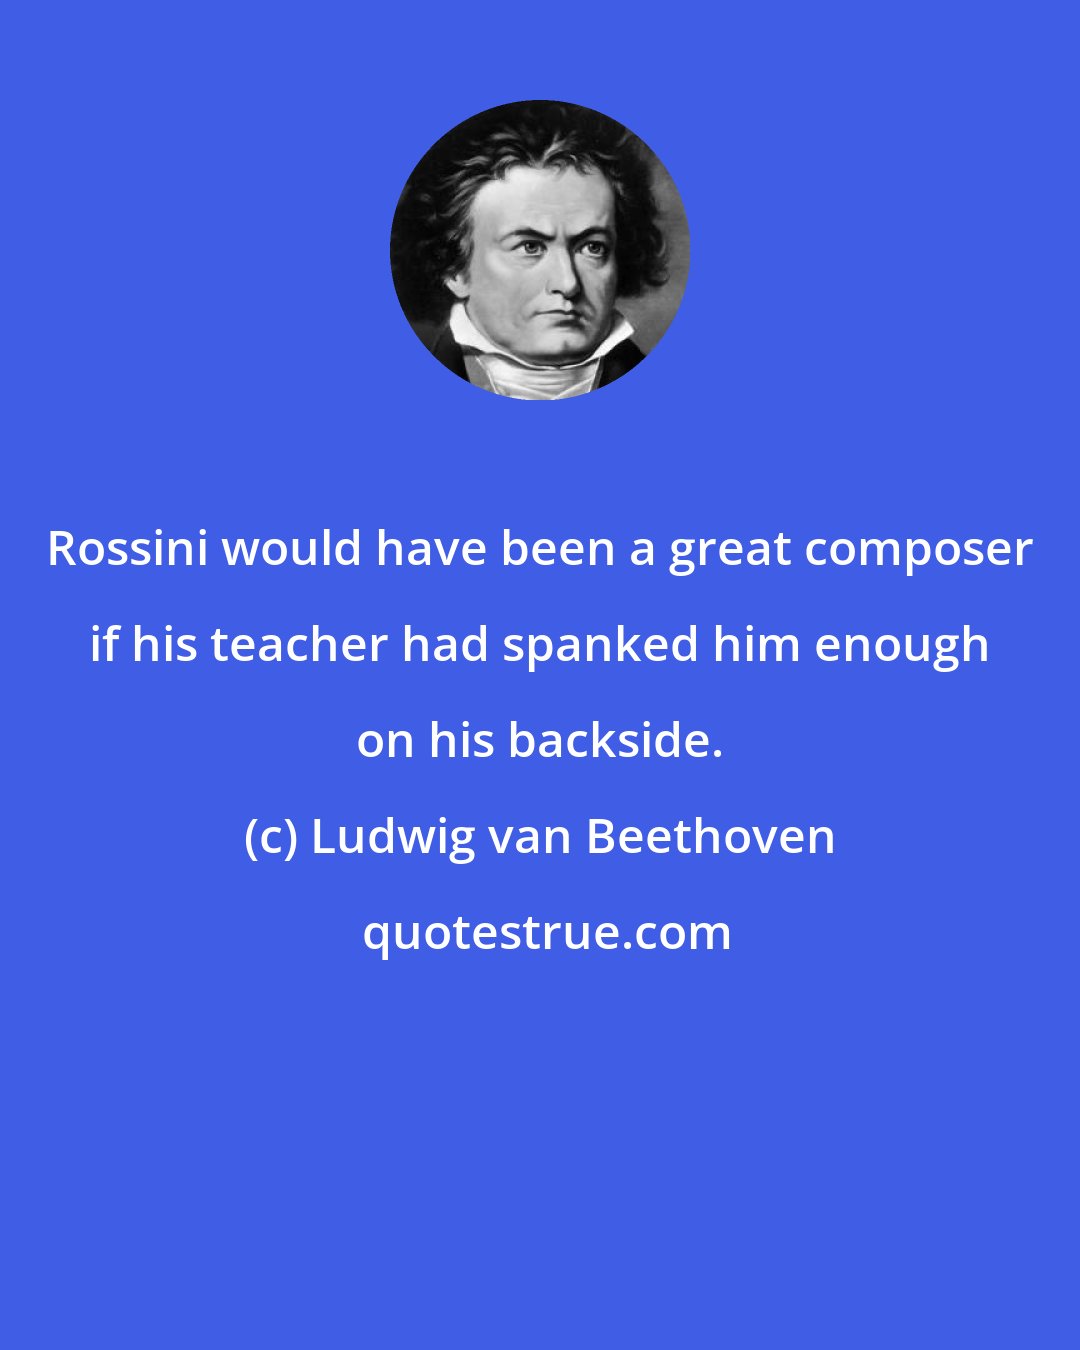 Ludwig van Beethoven: Rossini would have been a great composer if his teacher had spanked him enough on his backside.